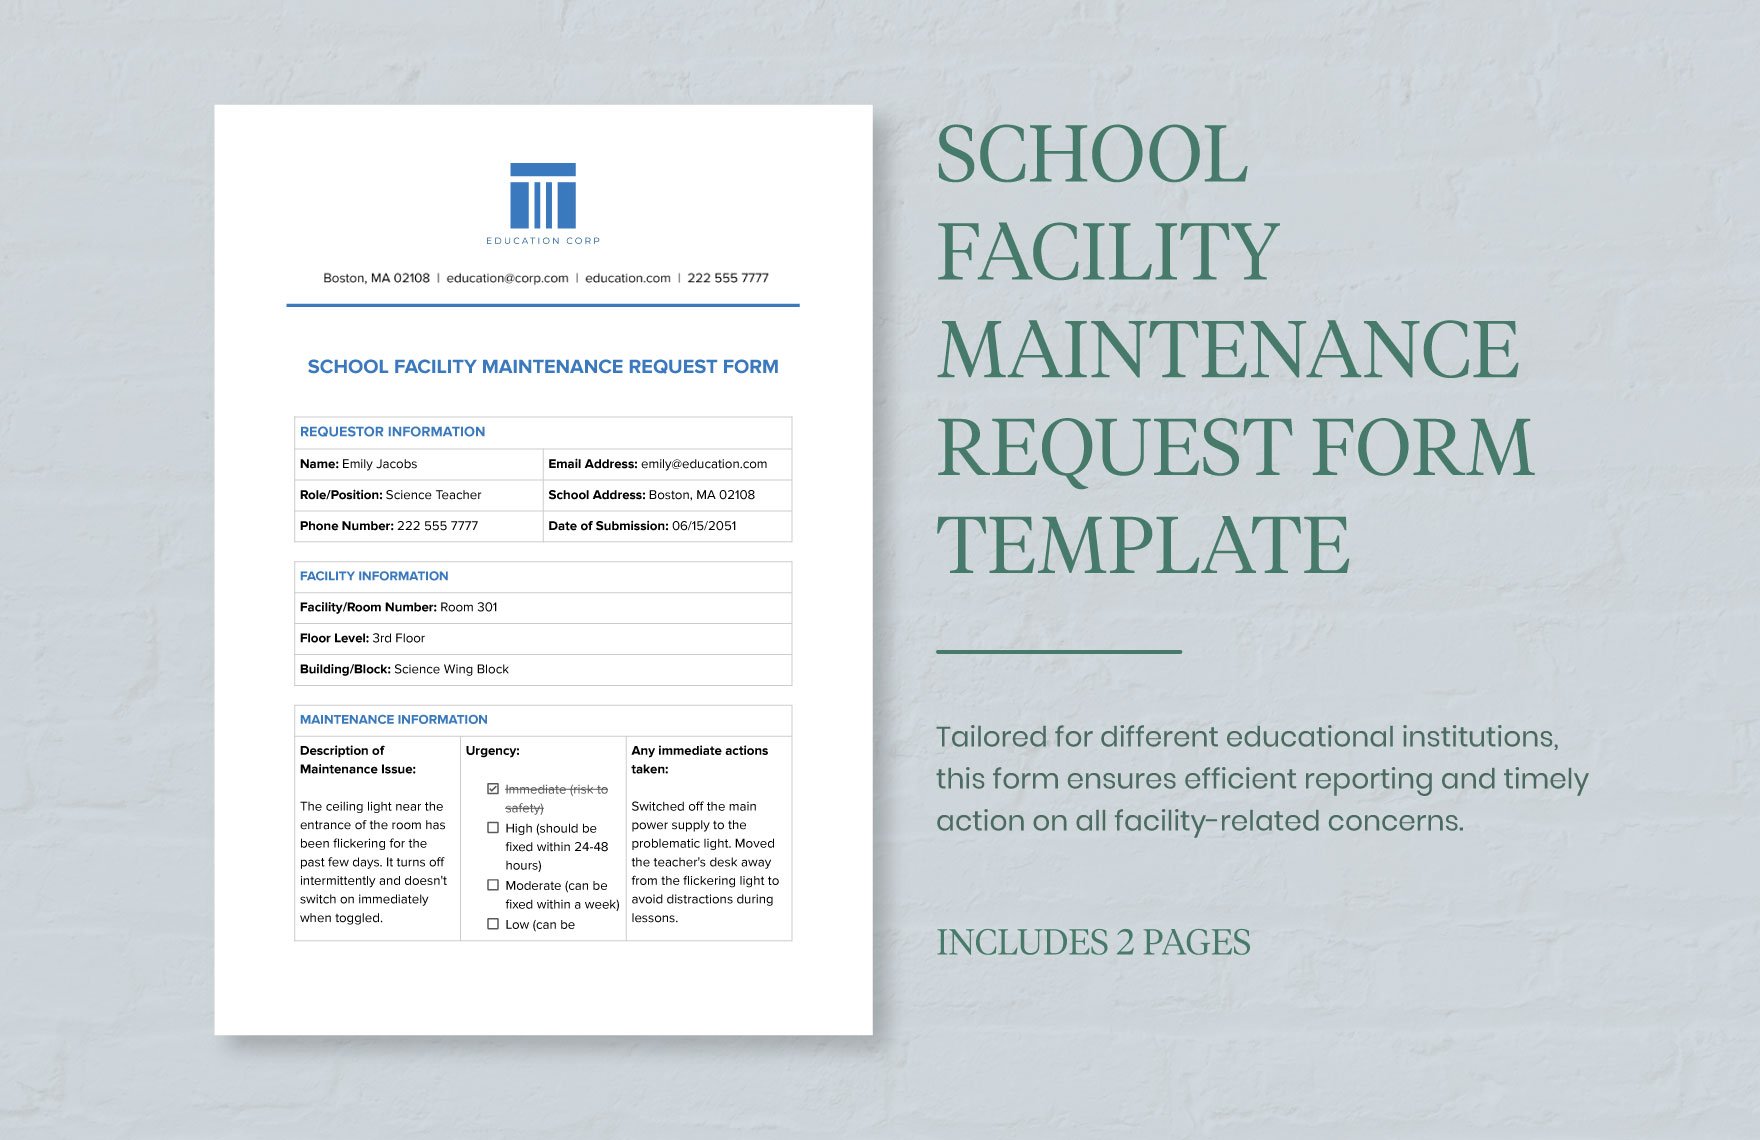 School Facility Maintenance Request Form Template in Word, Google Docs, PDF